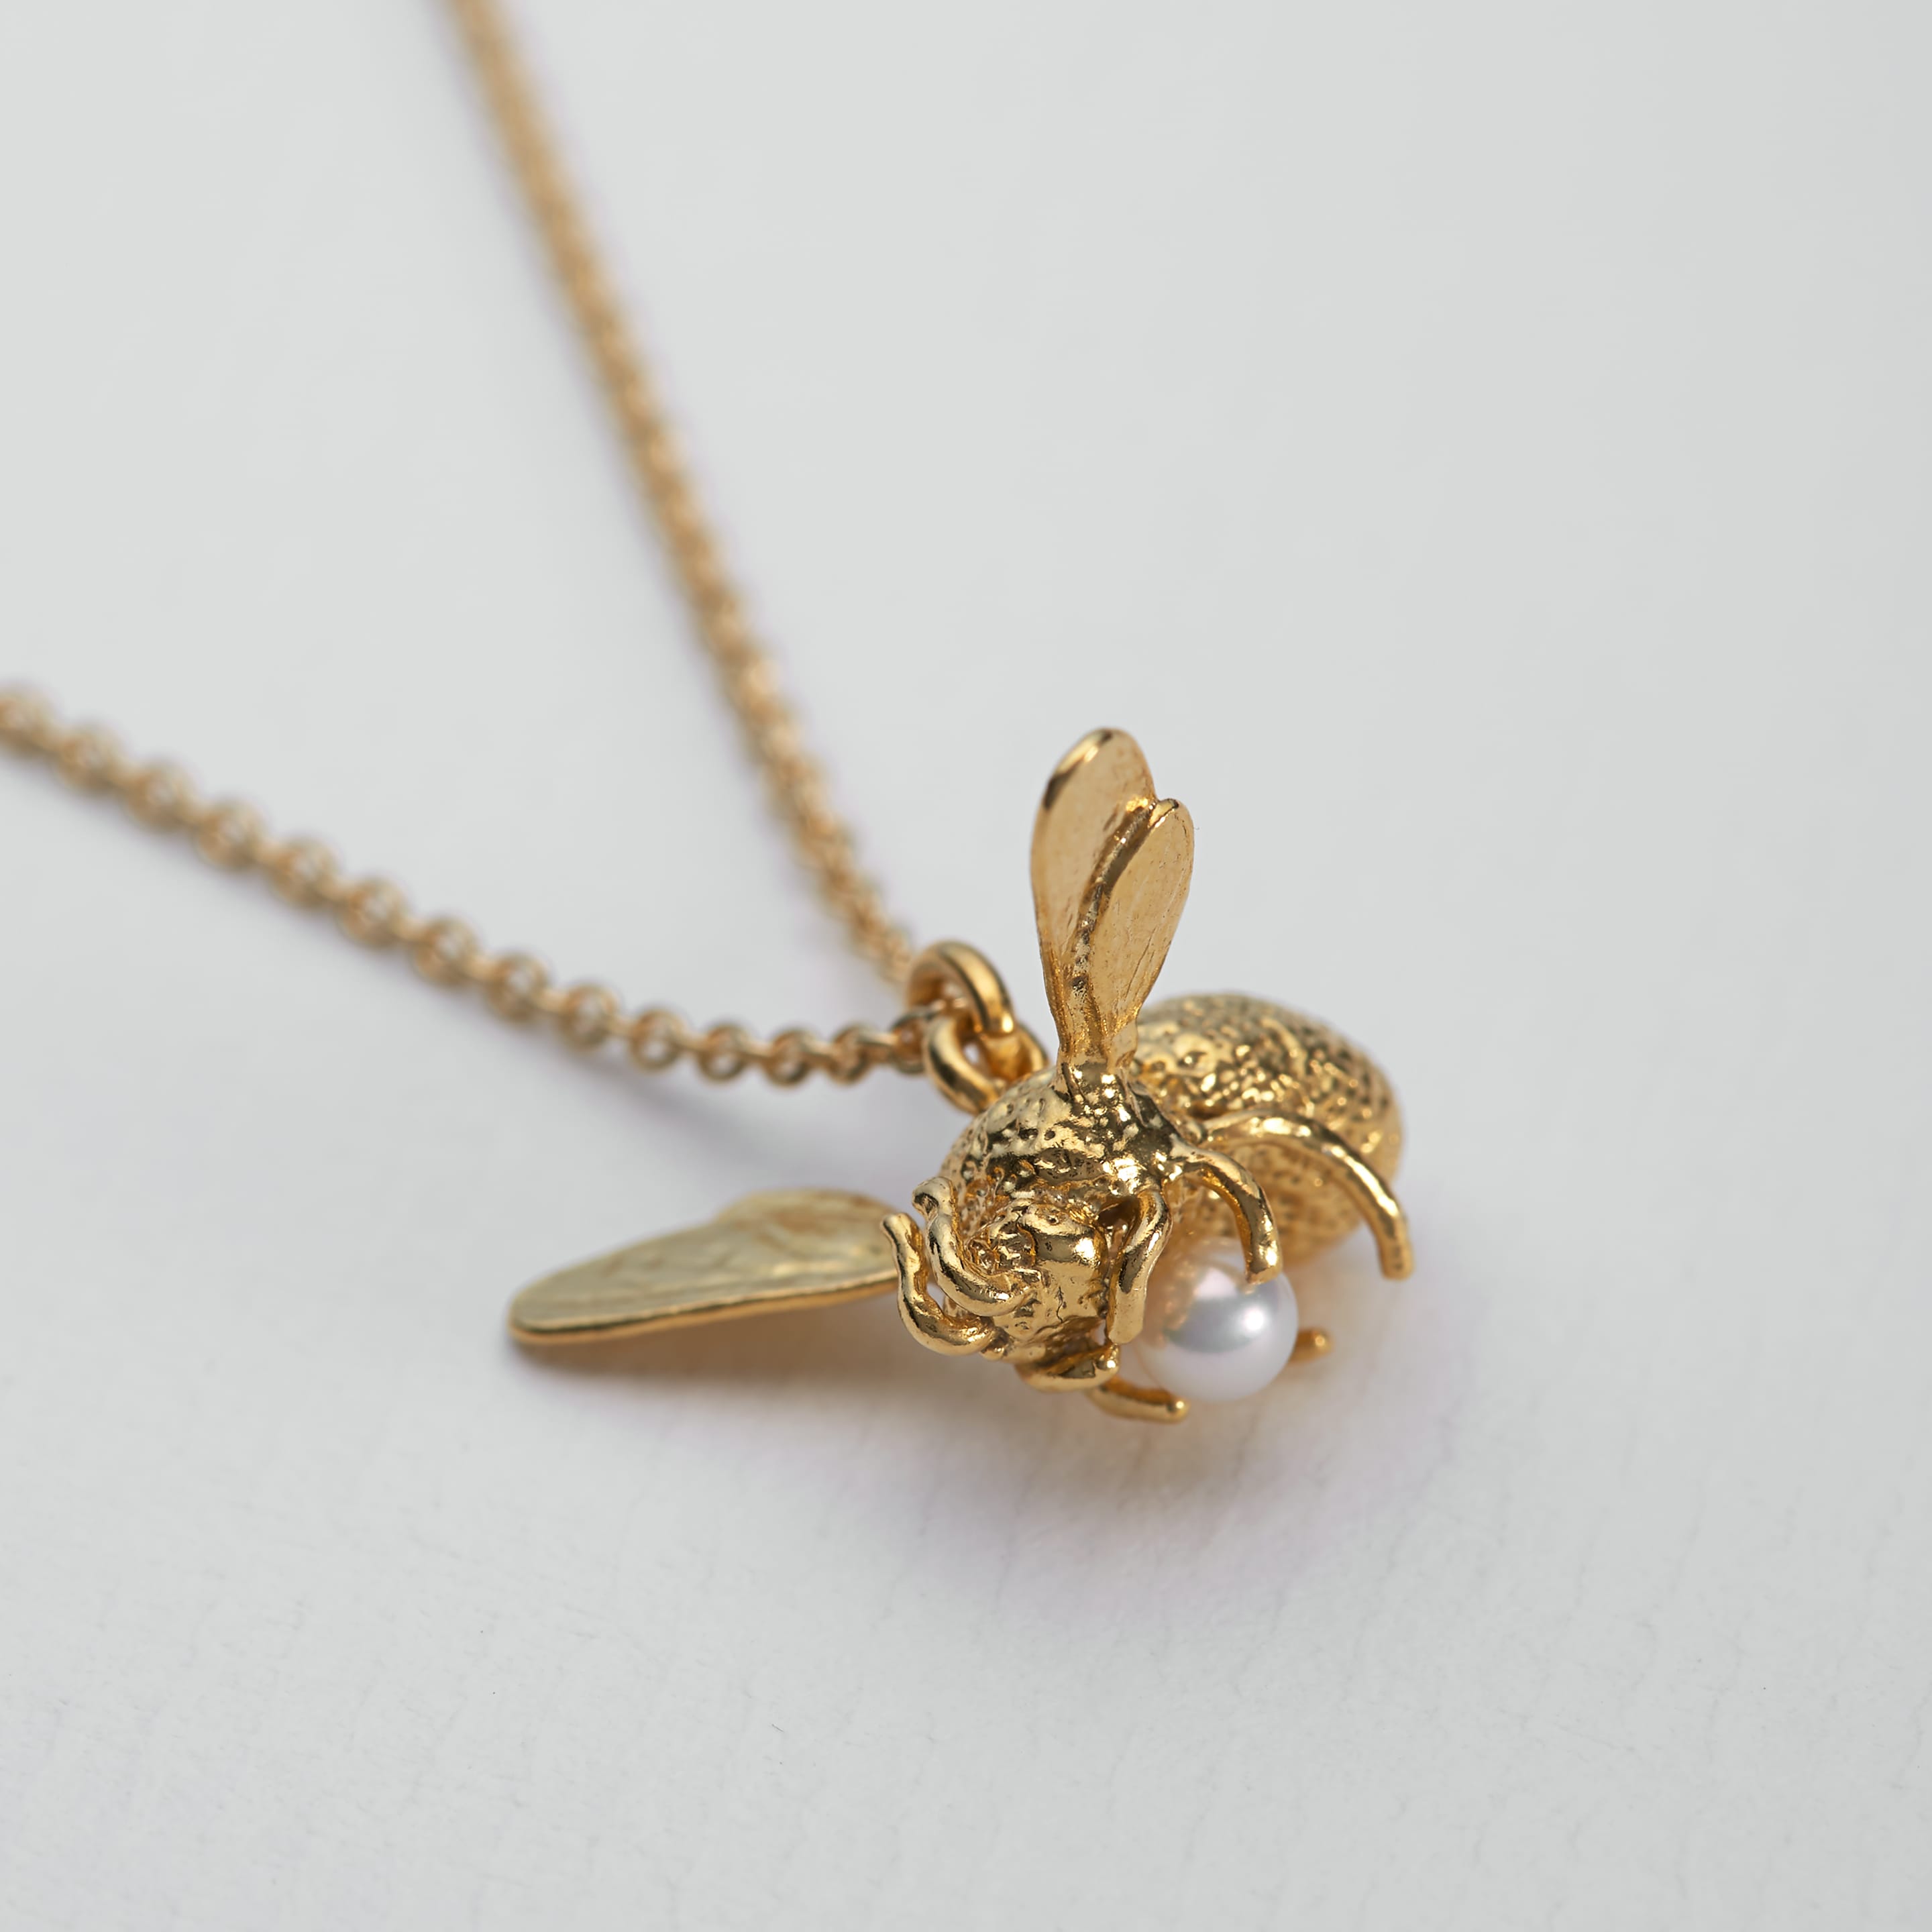 Buy Bee Necklace, Delicate Necklace, Bumble Bee Necklace, Dainty Necklace,  Bee Silver Pendant, Bee Jewelry, 925 Sterling Silver, Bee Choker Online in  India - Etsy